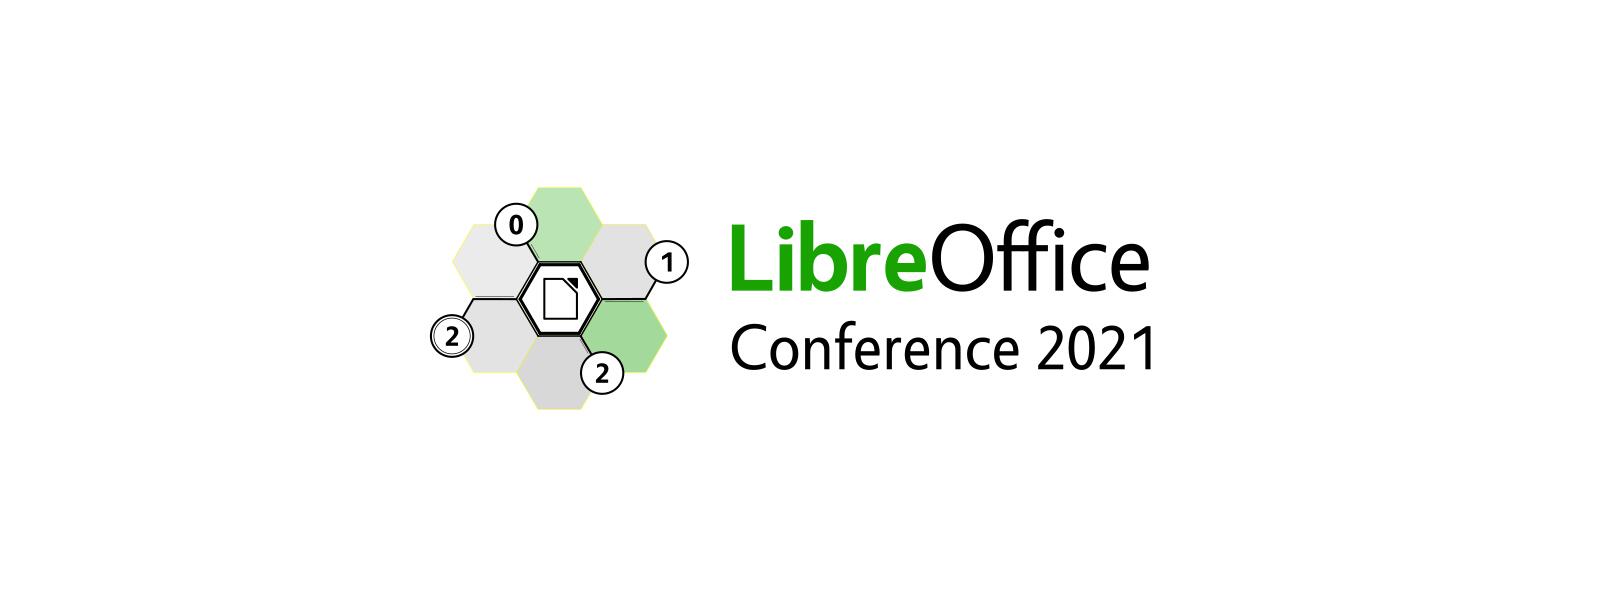 LibreOffice Conference 2021